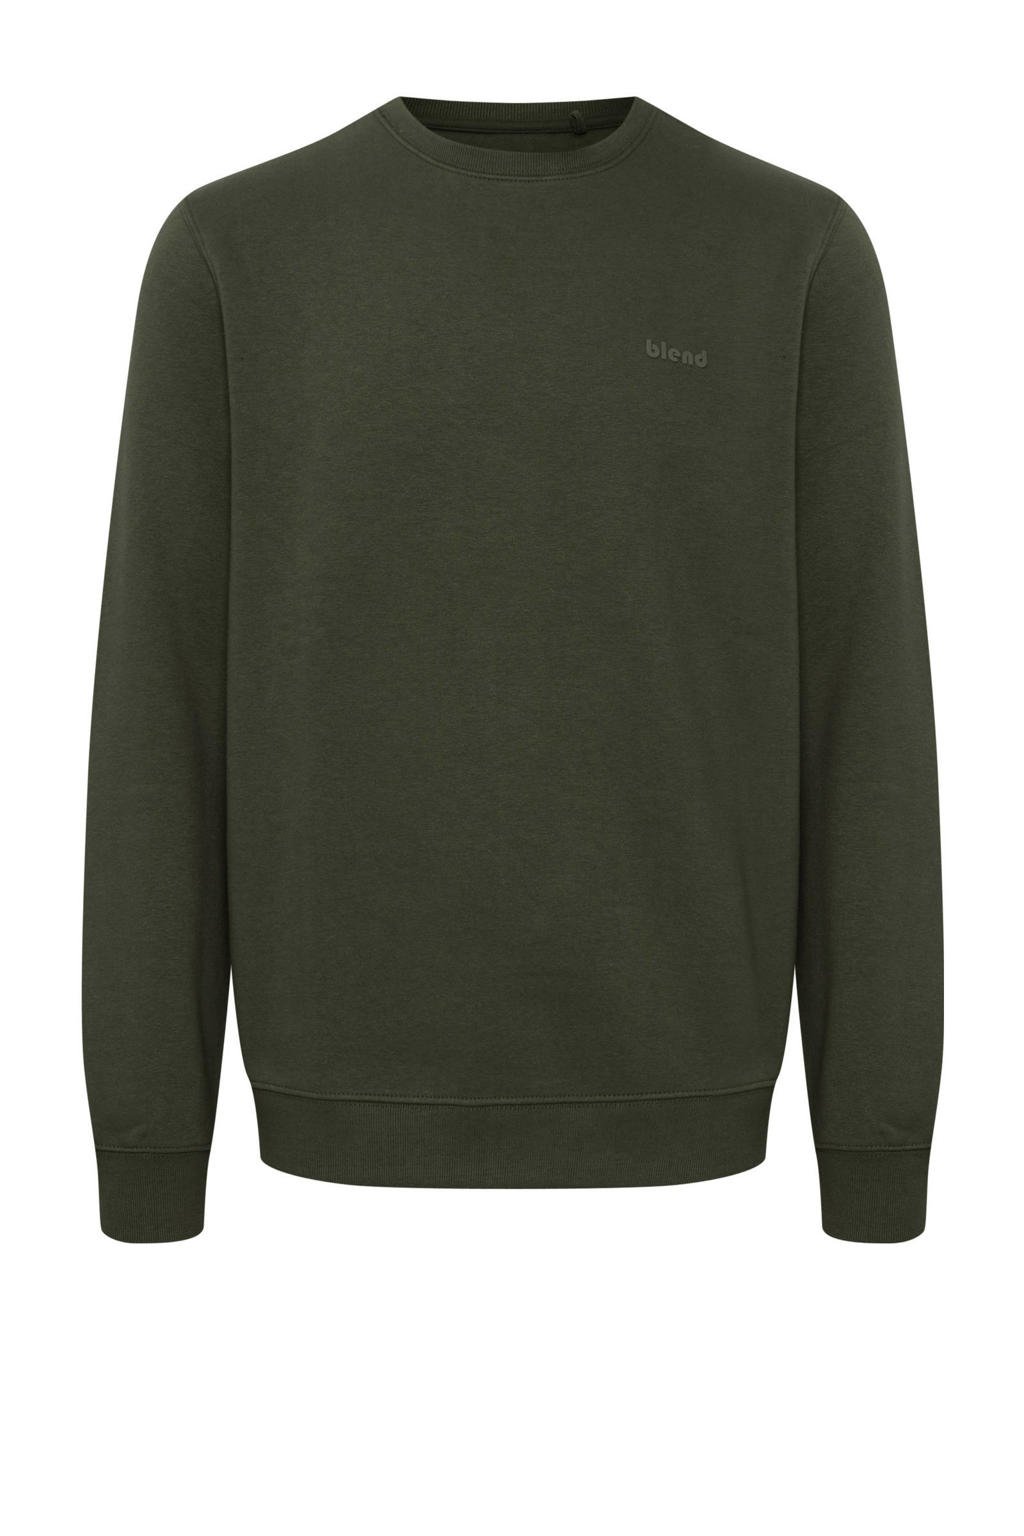 Blend sweater forest night